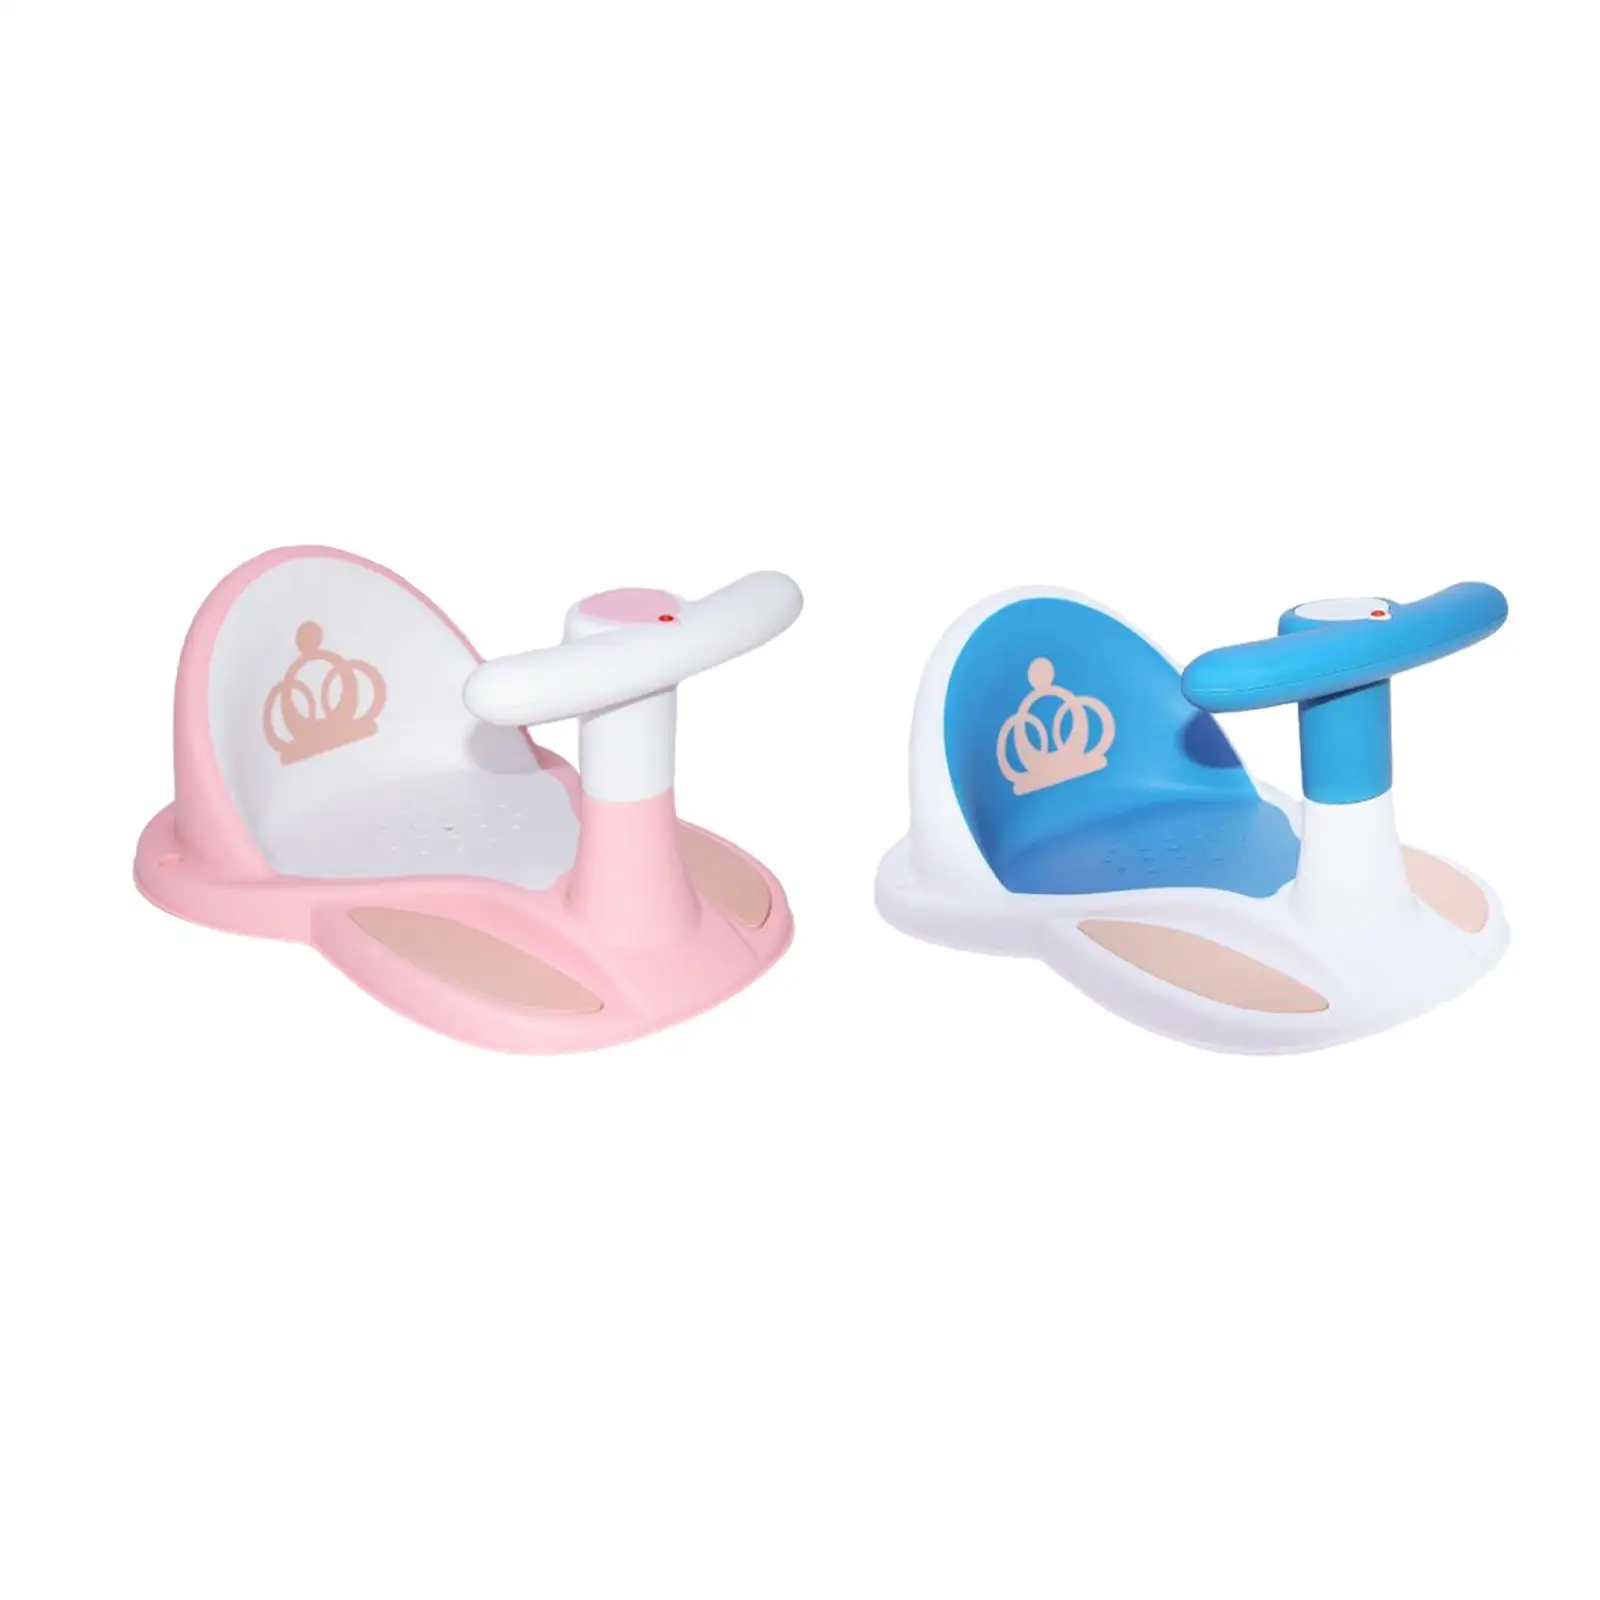 

Children Shower Chair Stable Portable with Suction Cup Baby Bathtub Seat Infants Bath Seat for Infants Baby Toddlers Kids Girls